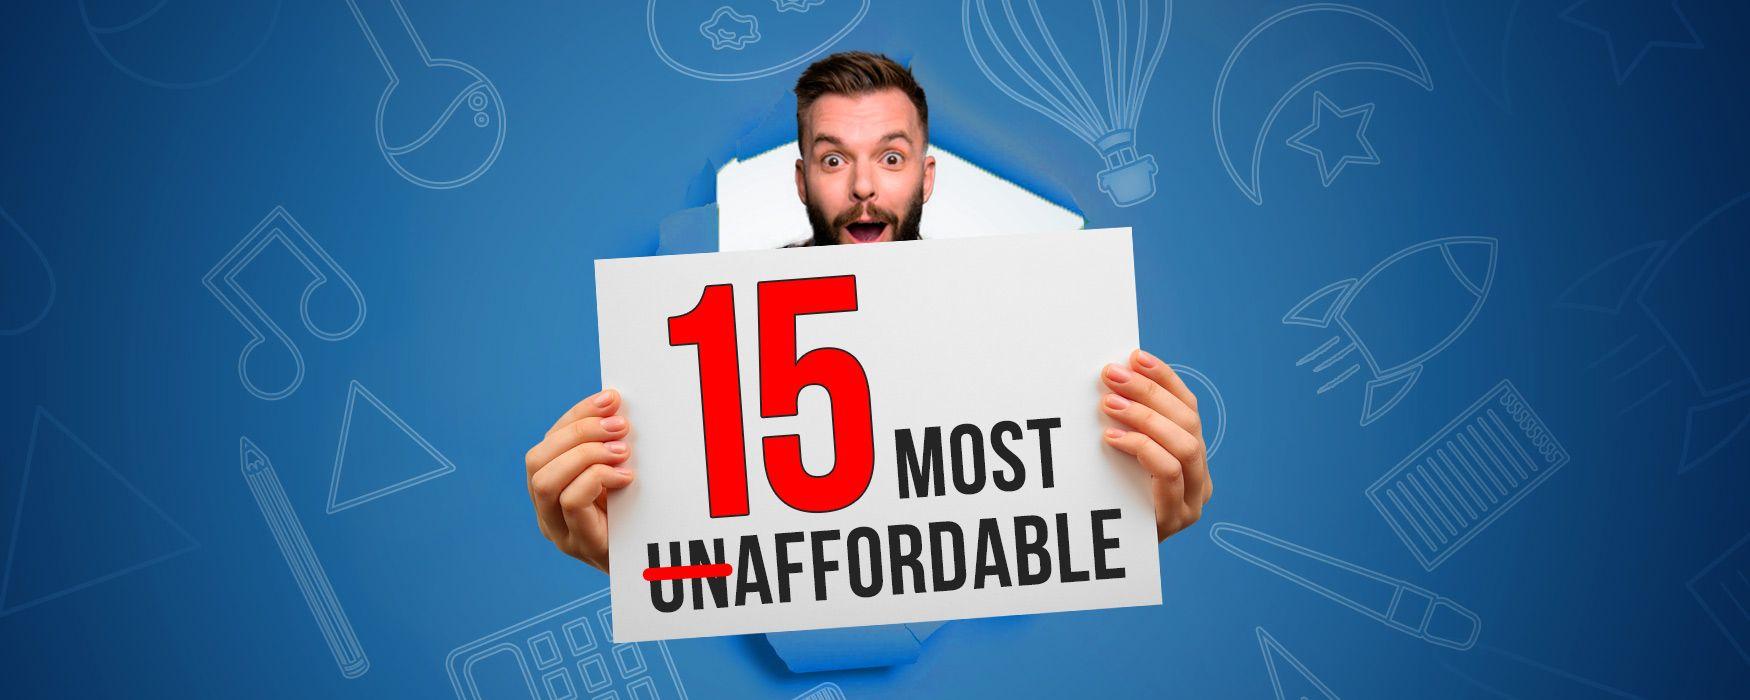 15-Most-Affordable-Colleges-for-International-Students.jpg